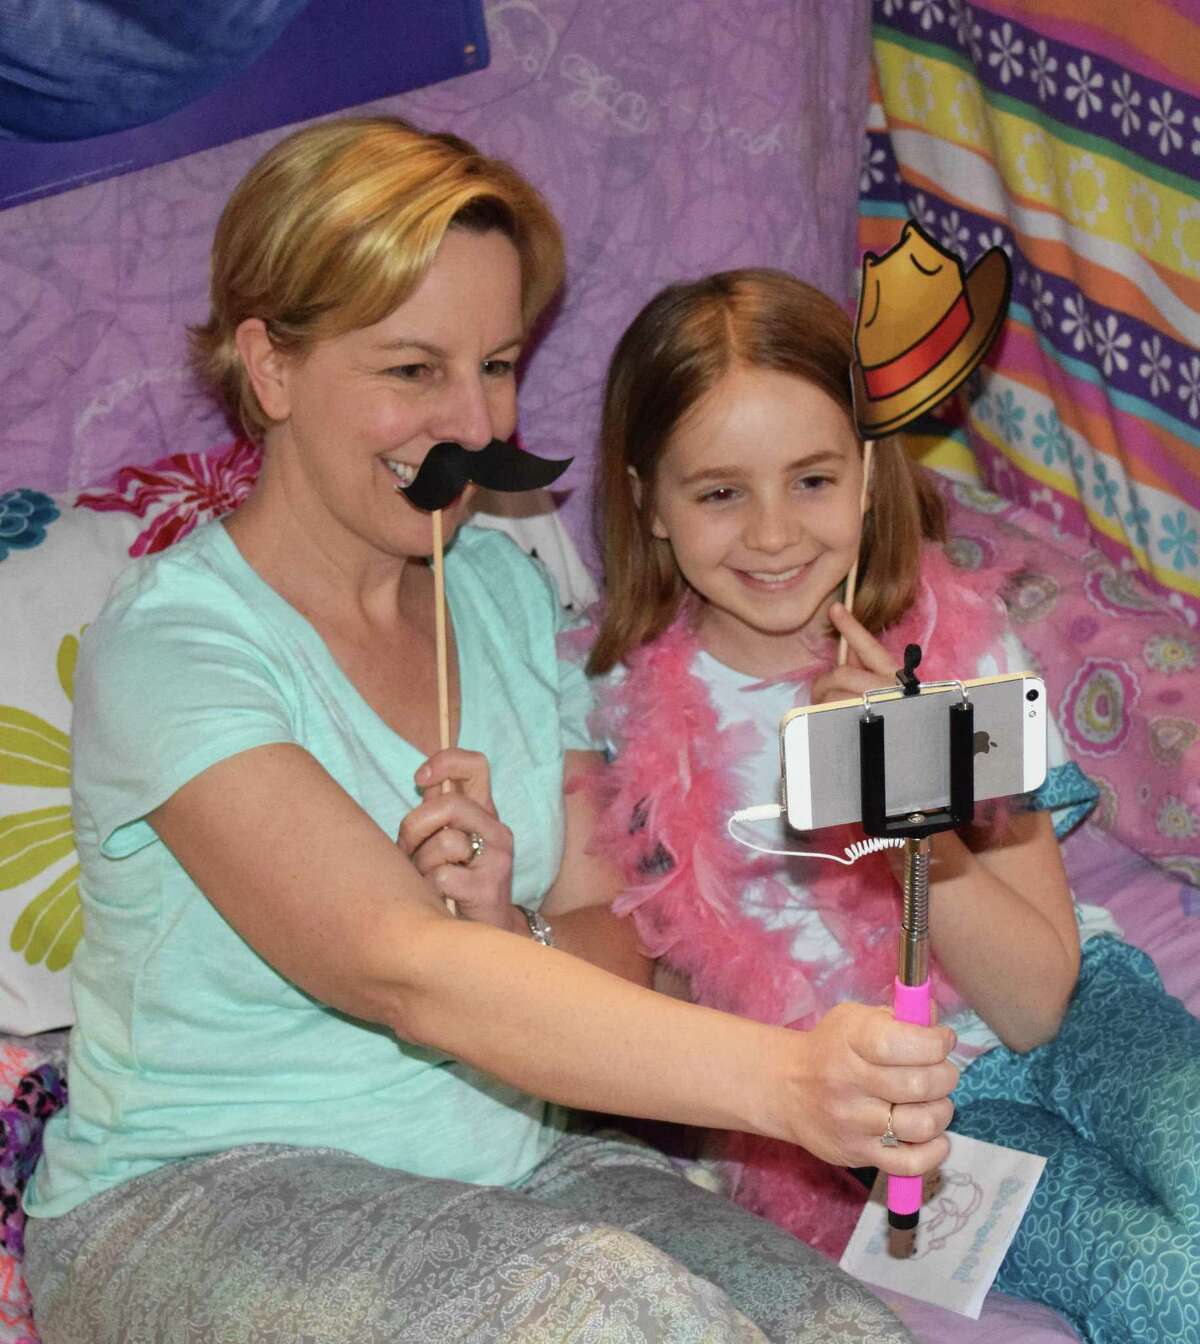 Michele MacDonnell and her daughter, Brynn, 8, capture a lighthearted moment together at the selfie station, one of several stations set up at the Girls' Night Out event, co-hosted by New Milford Girl Scout Troops 40326 and 40325 April 21, 2017, at New Milford High School. The mother-daughter event was based on a pajama party theme.